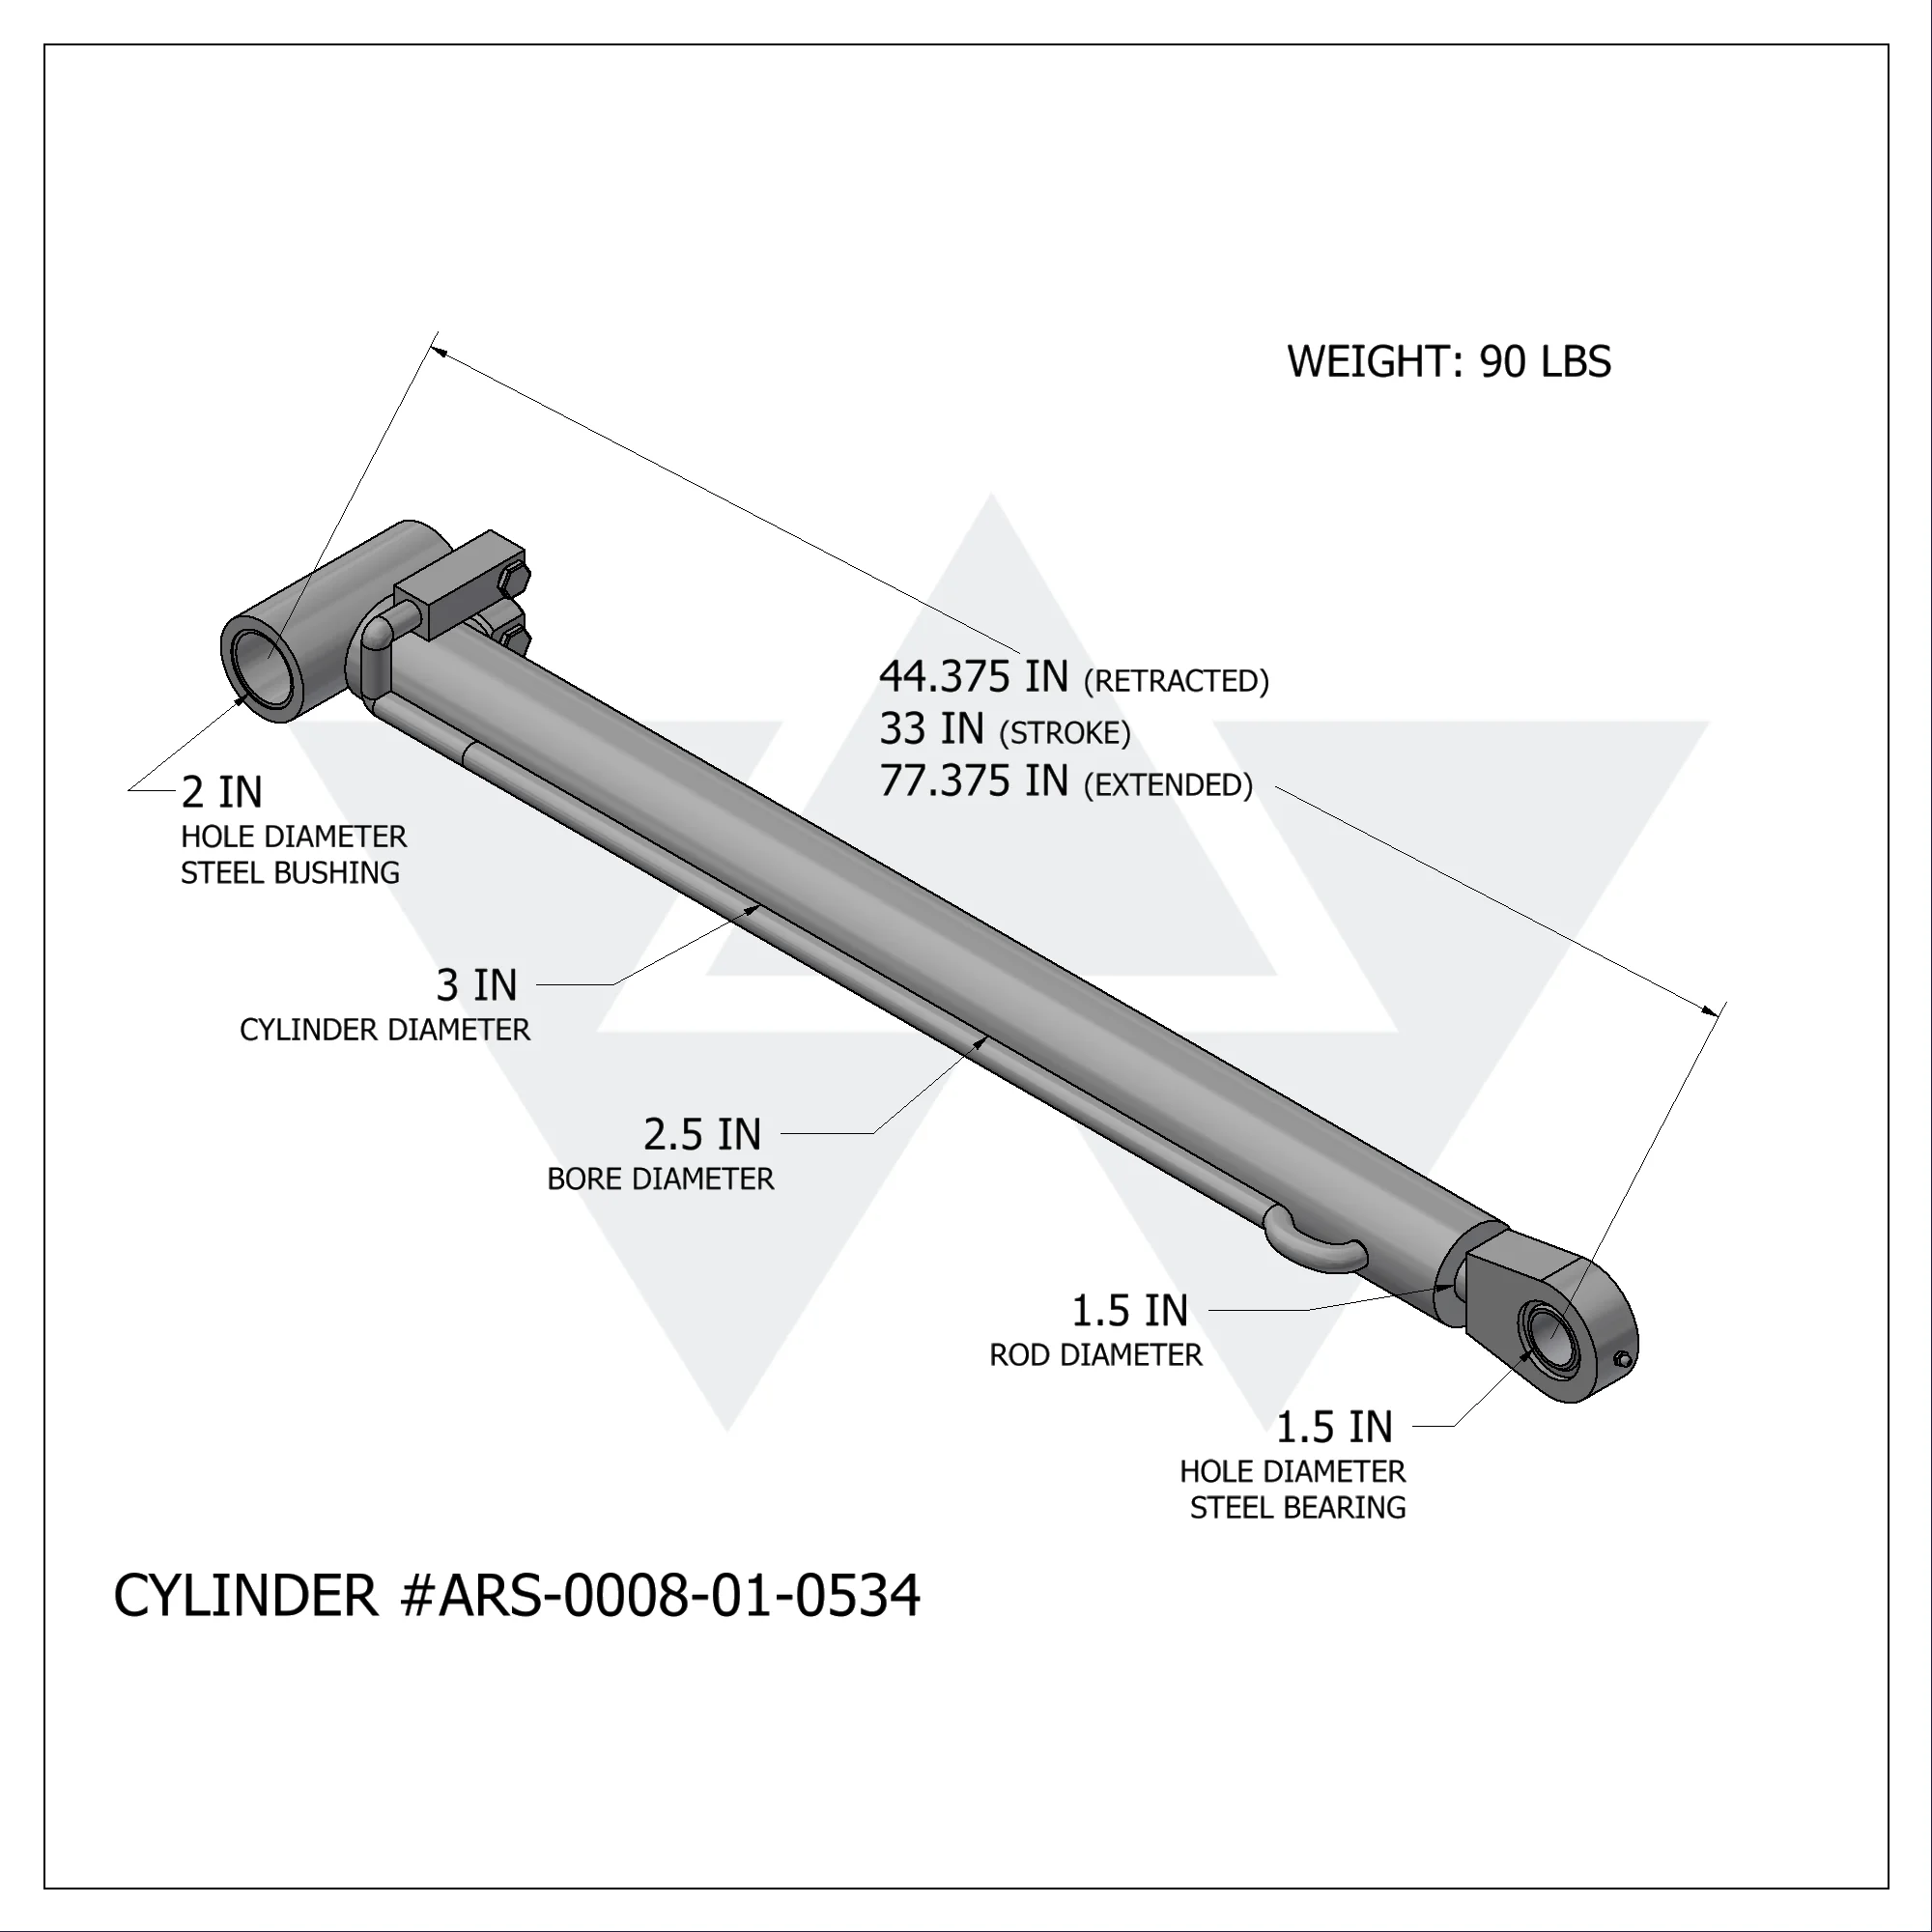 Wastebuilt® Replacement for Ariozan Refuse Systems Lift Cylinder (2.5" X 1.5" X 33")